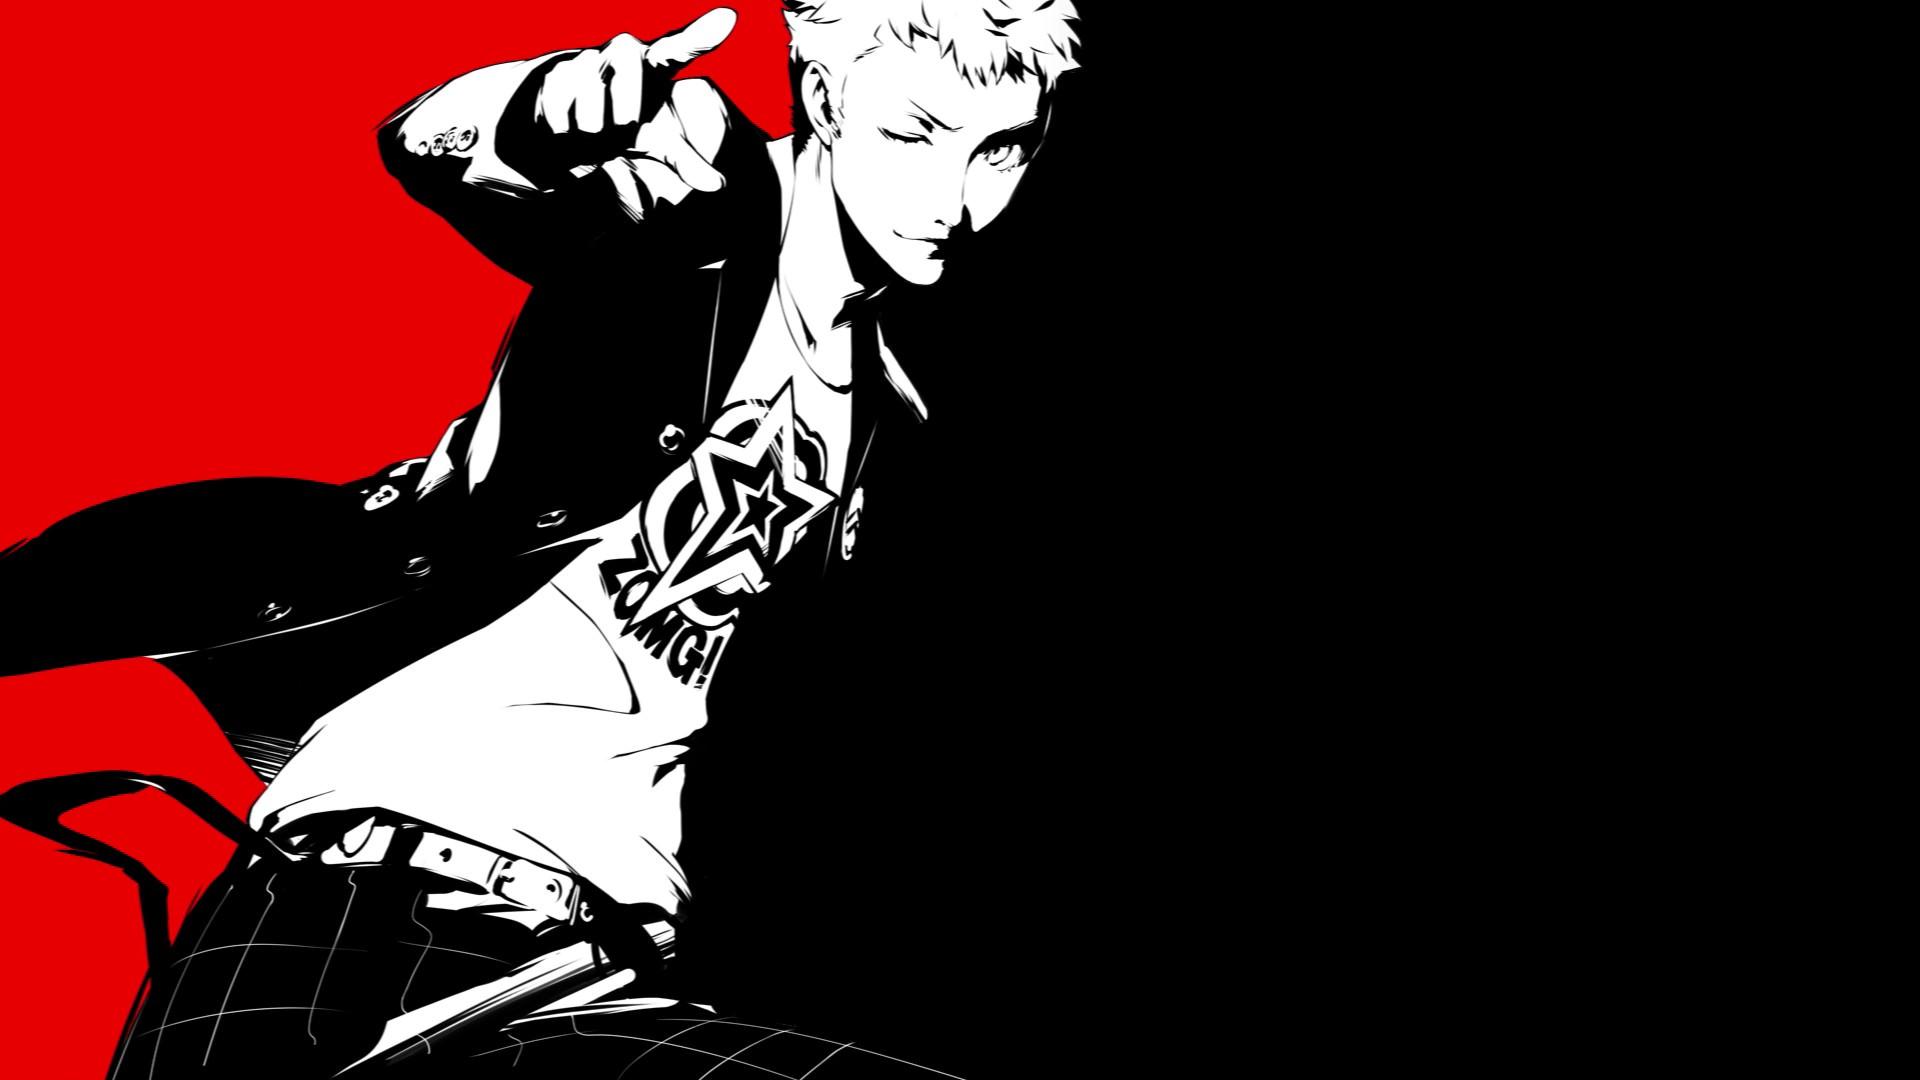 Persona 5 4K Wallpapers - Top Free Persona 5 4K Backgrounds